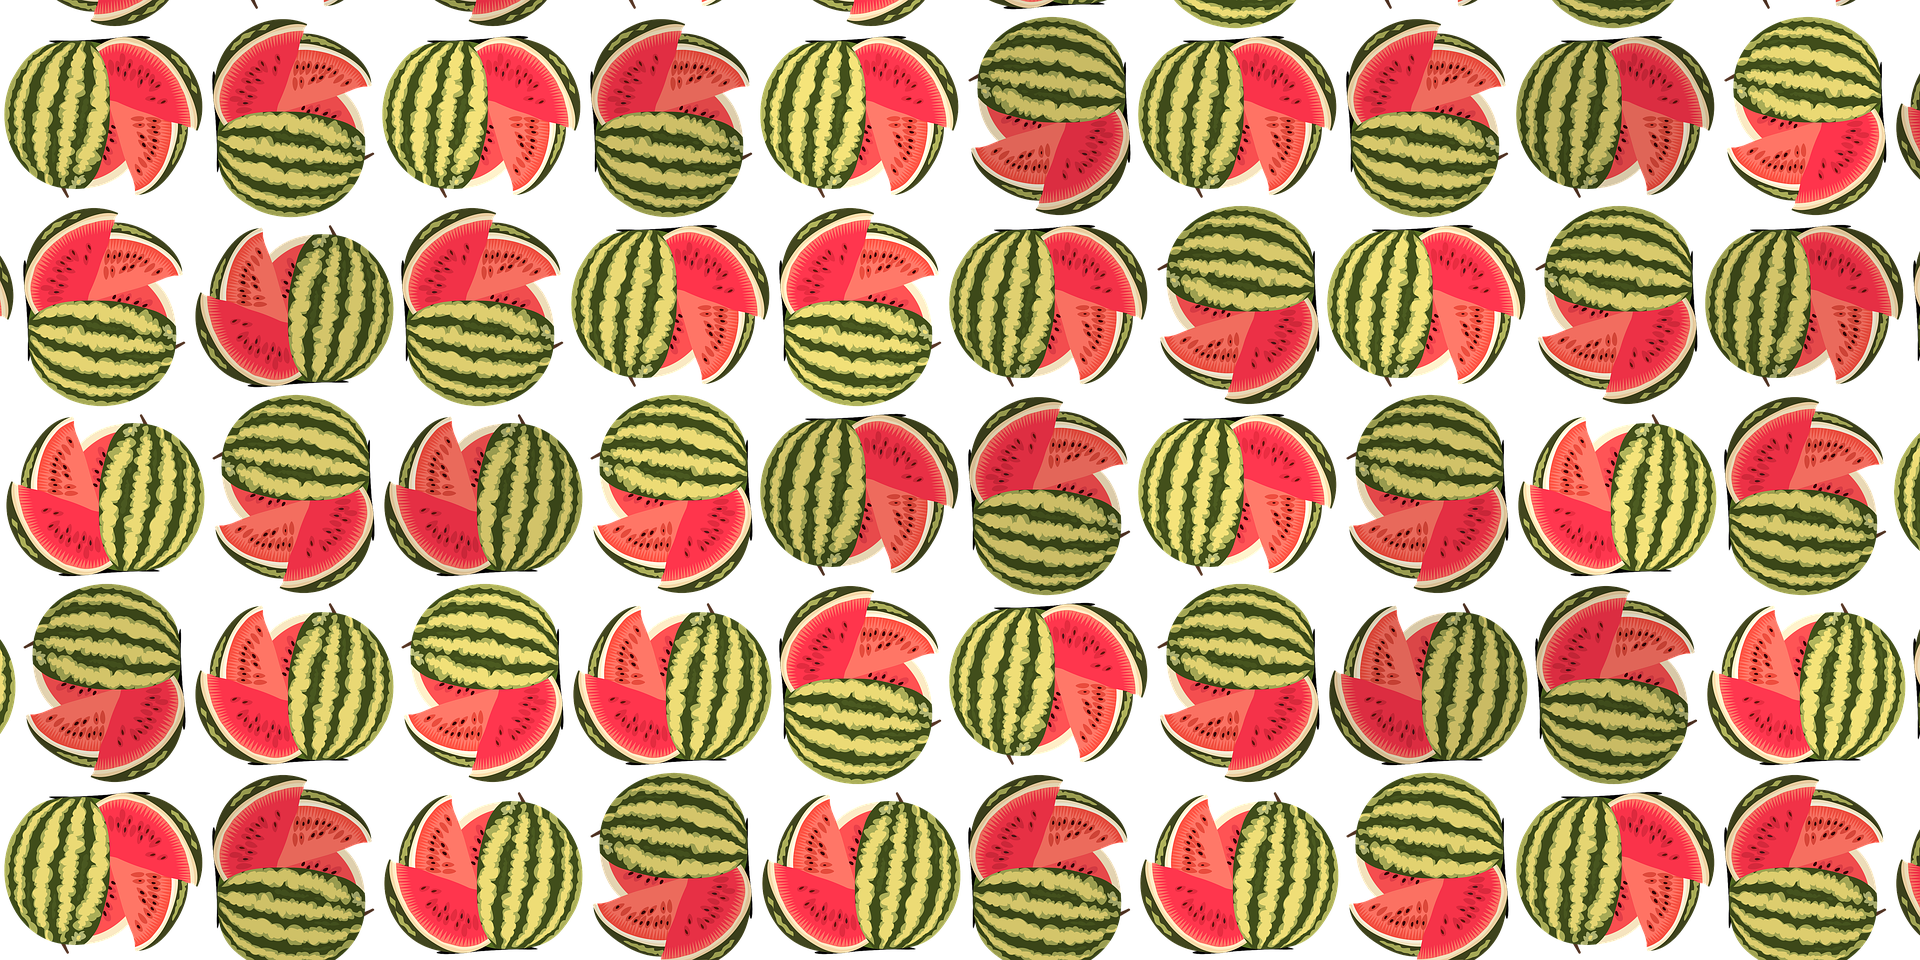 An illustrated image of a whole watermelon sliced open and repeated in rows as a pattern.